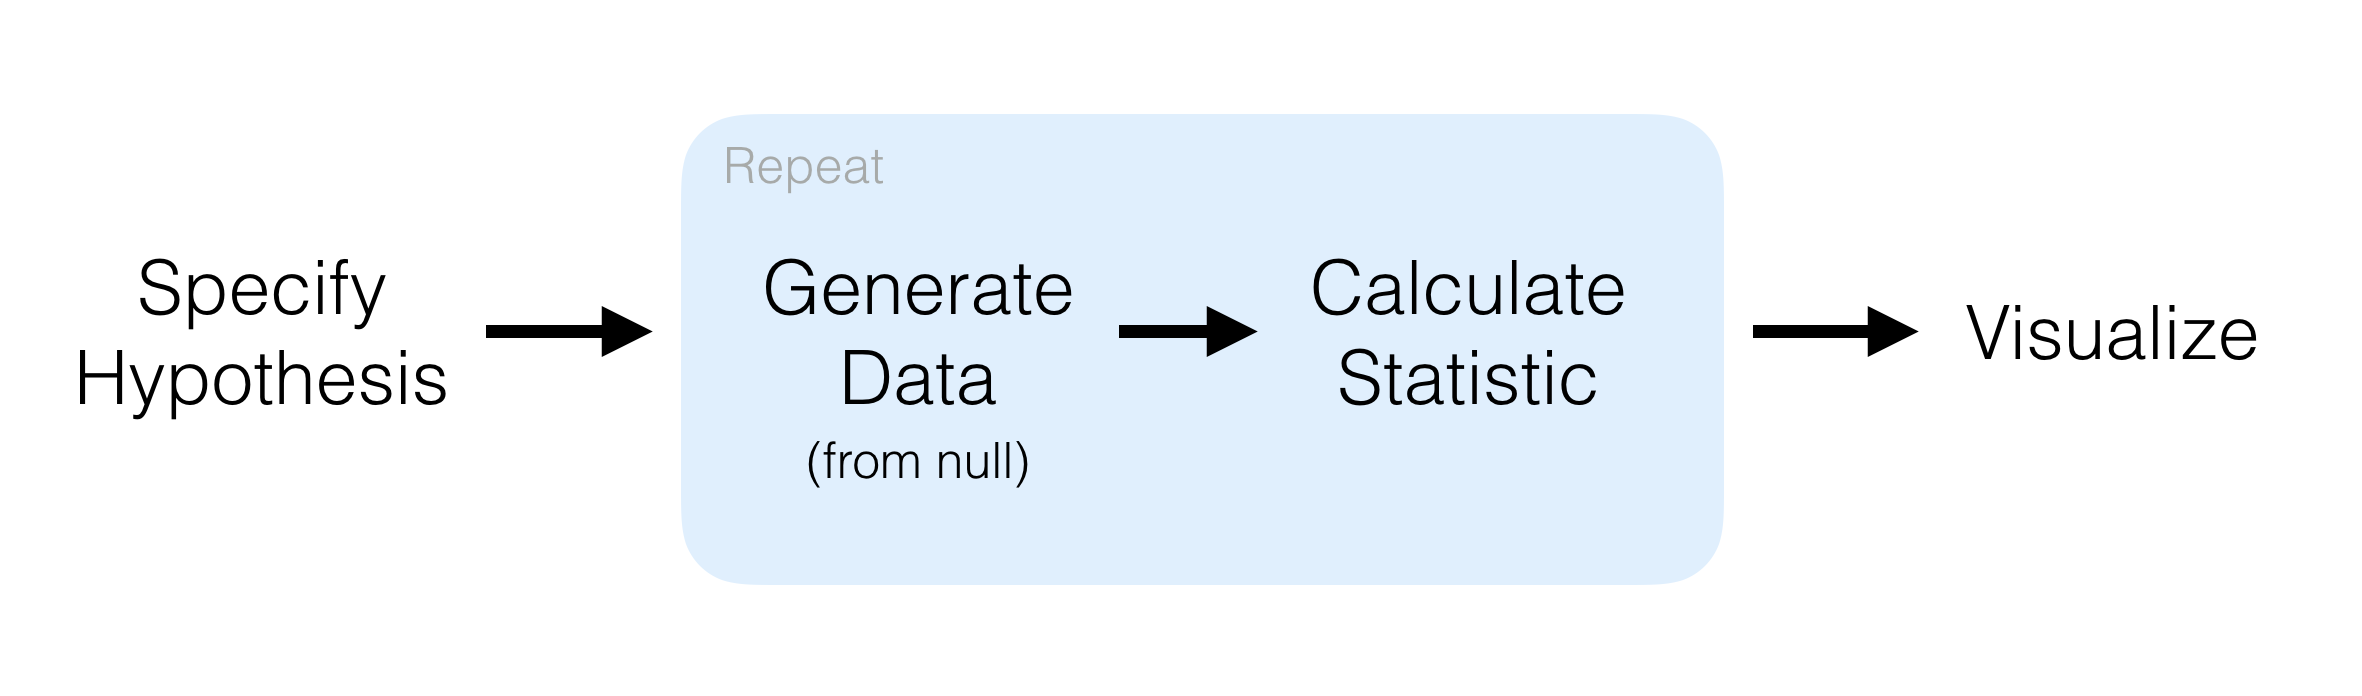 A diagram showing four steps to carry out randomization-based inference: specify hypothesis, generate data, calculate statistic, and visualize. From left to right, each step is connected by an arrow, while the diagram indicates that generating data and calculating statistics can happen iteratively.